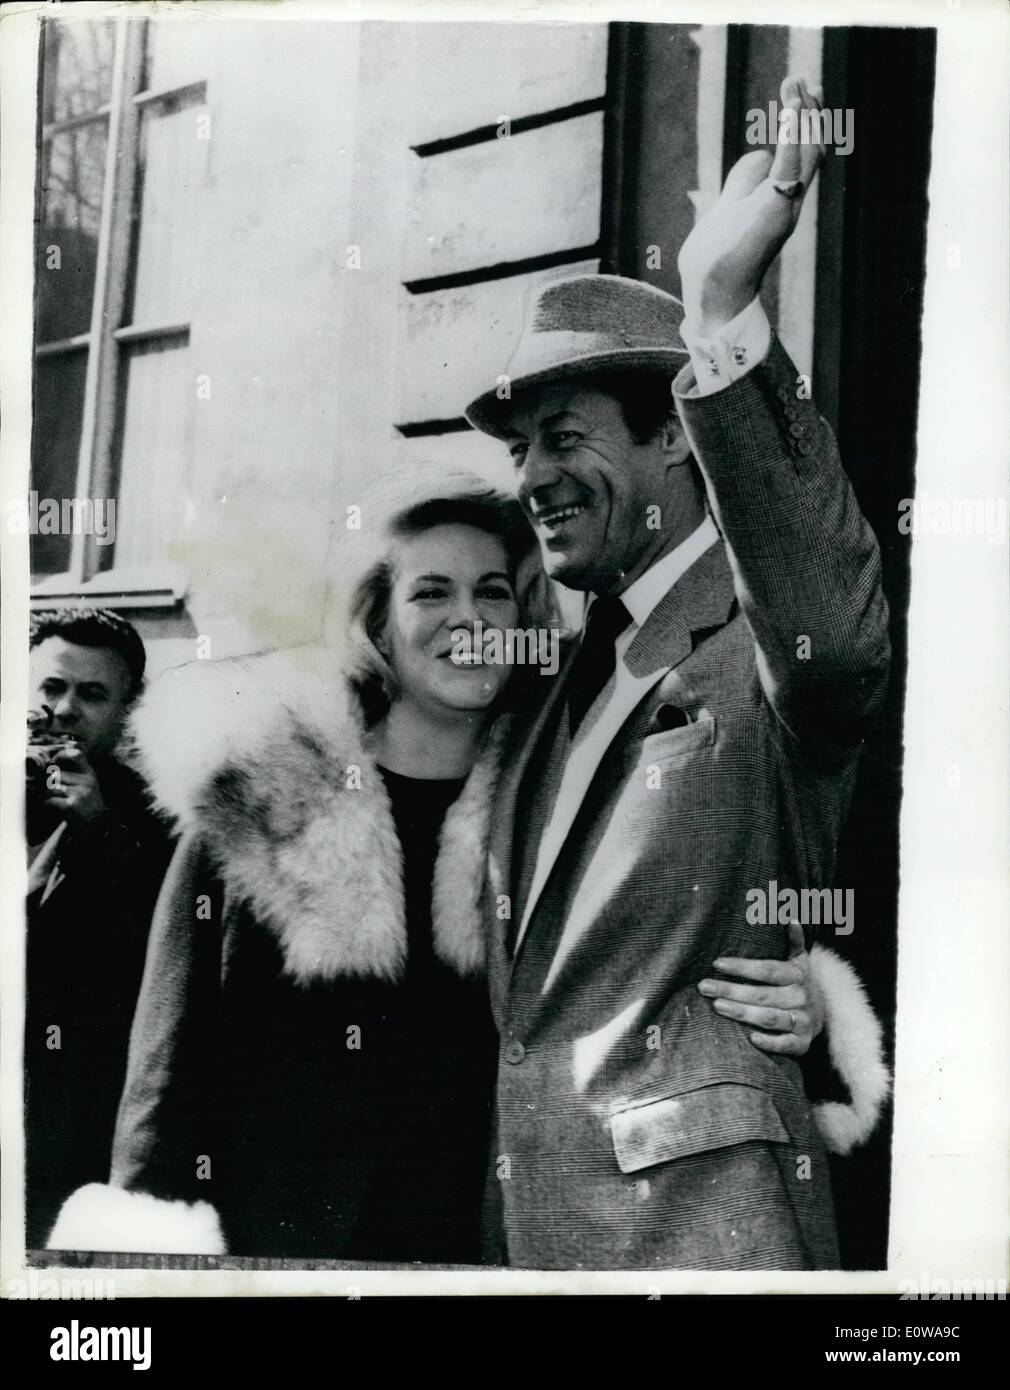 Mar. 03, 1962 - Rex Harrison marries Rachel Roberts: Film actor res Harrison, 53, married Rachel Roberts, 34, one of the stars of Saturday night and Sunday morning, in a civil ceremony at Genoa, Italy, this week. It is his third marriage and her second. he is portraying Julius Caesar in the film Cleopatra, now being made in Rome. Photo shows the couple after the wedding. Stock Photo